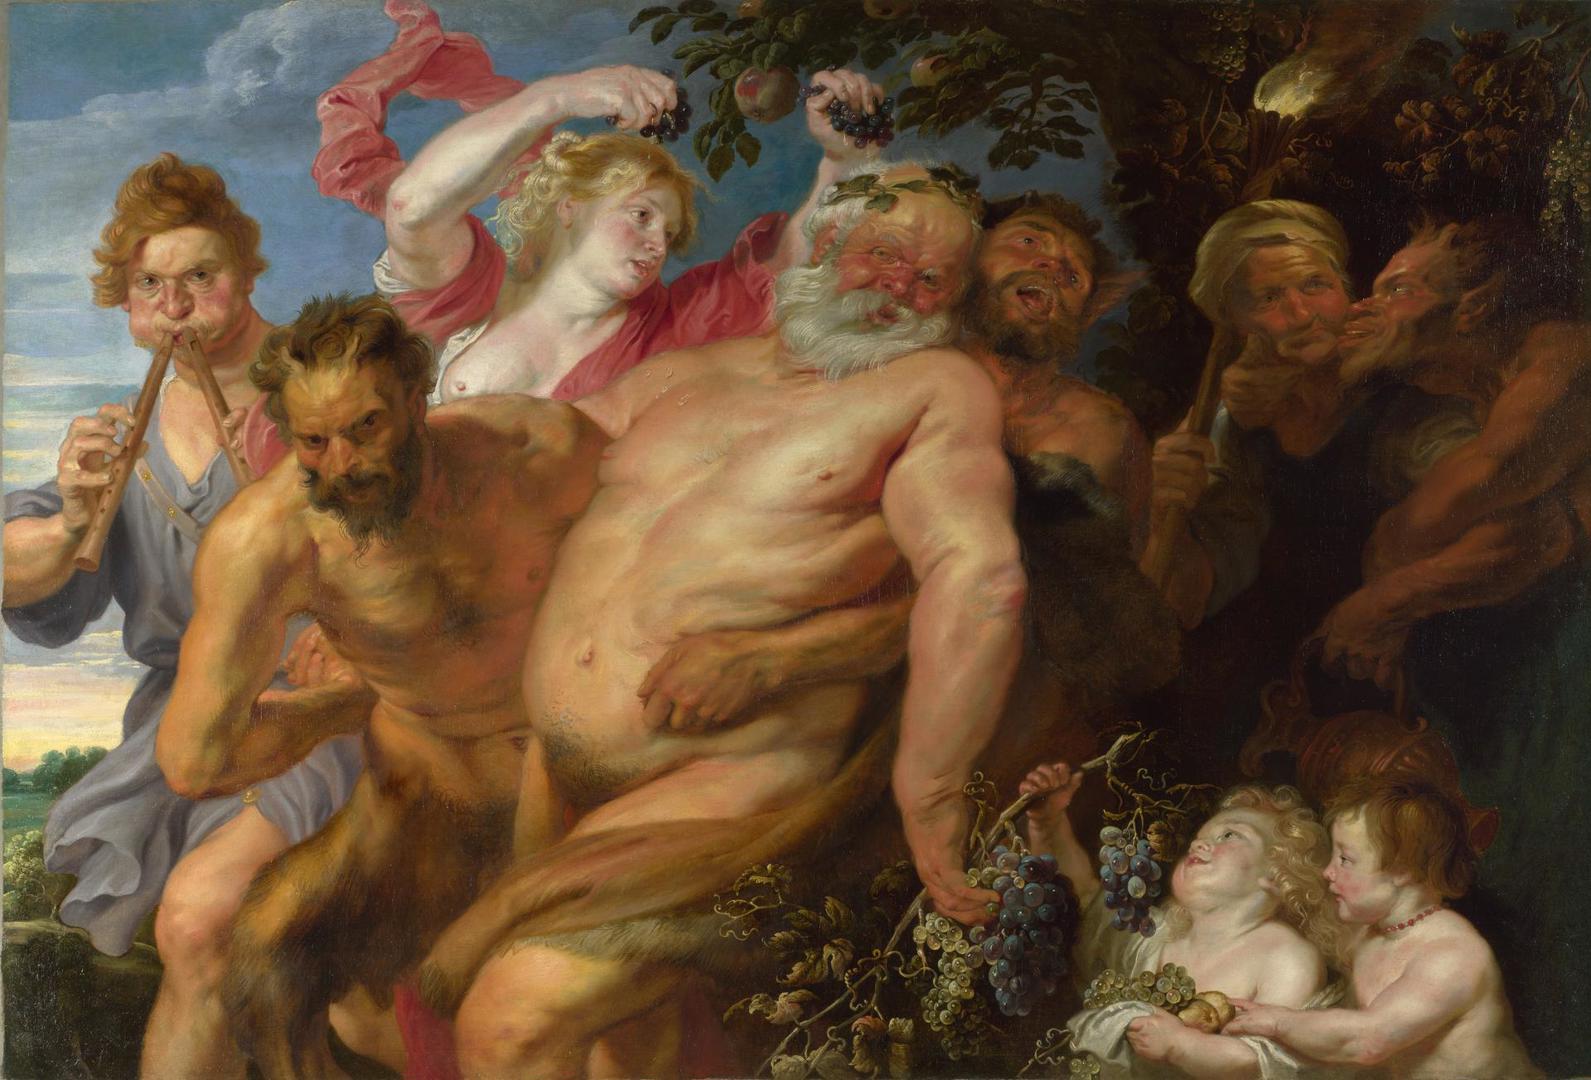 Drunken Silenus supported by Satyrs by Possibly by Anthony van Dyck